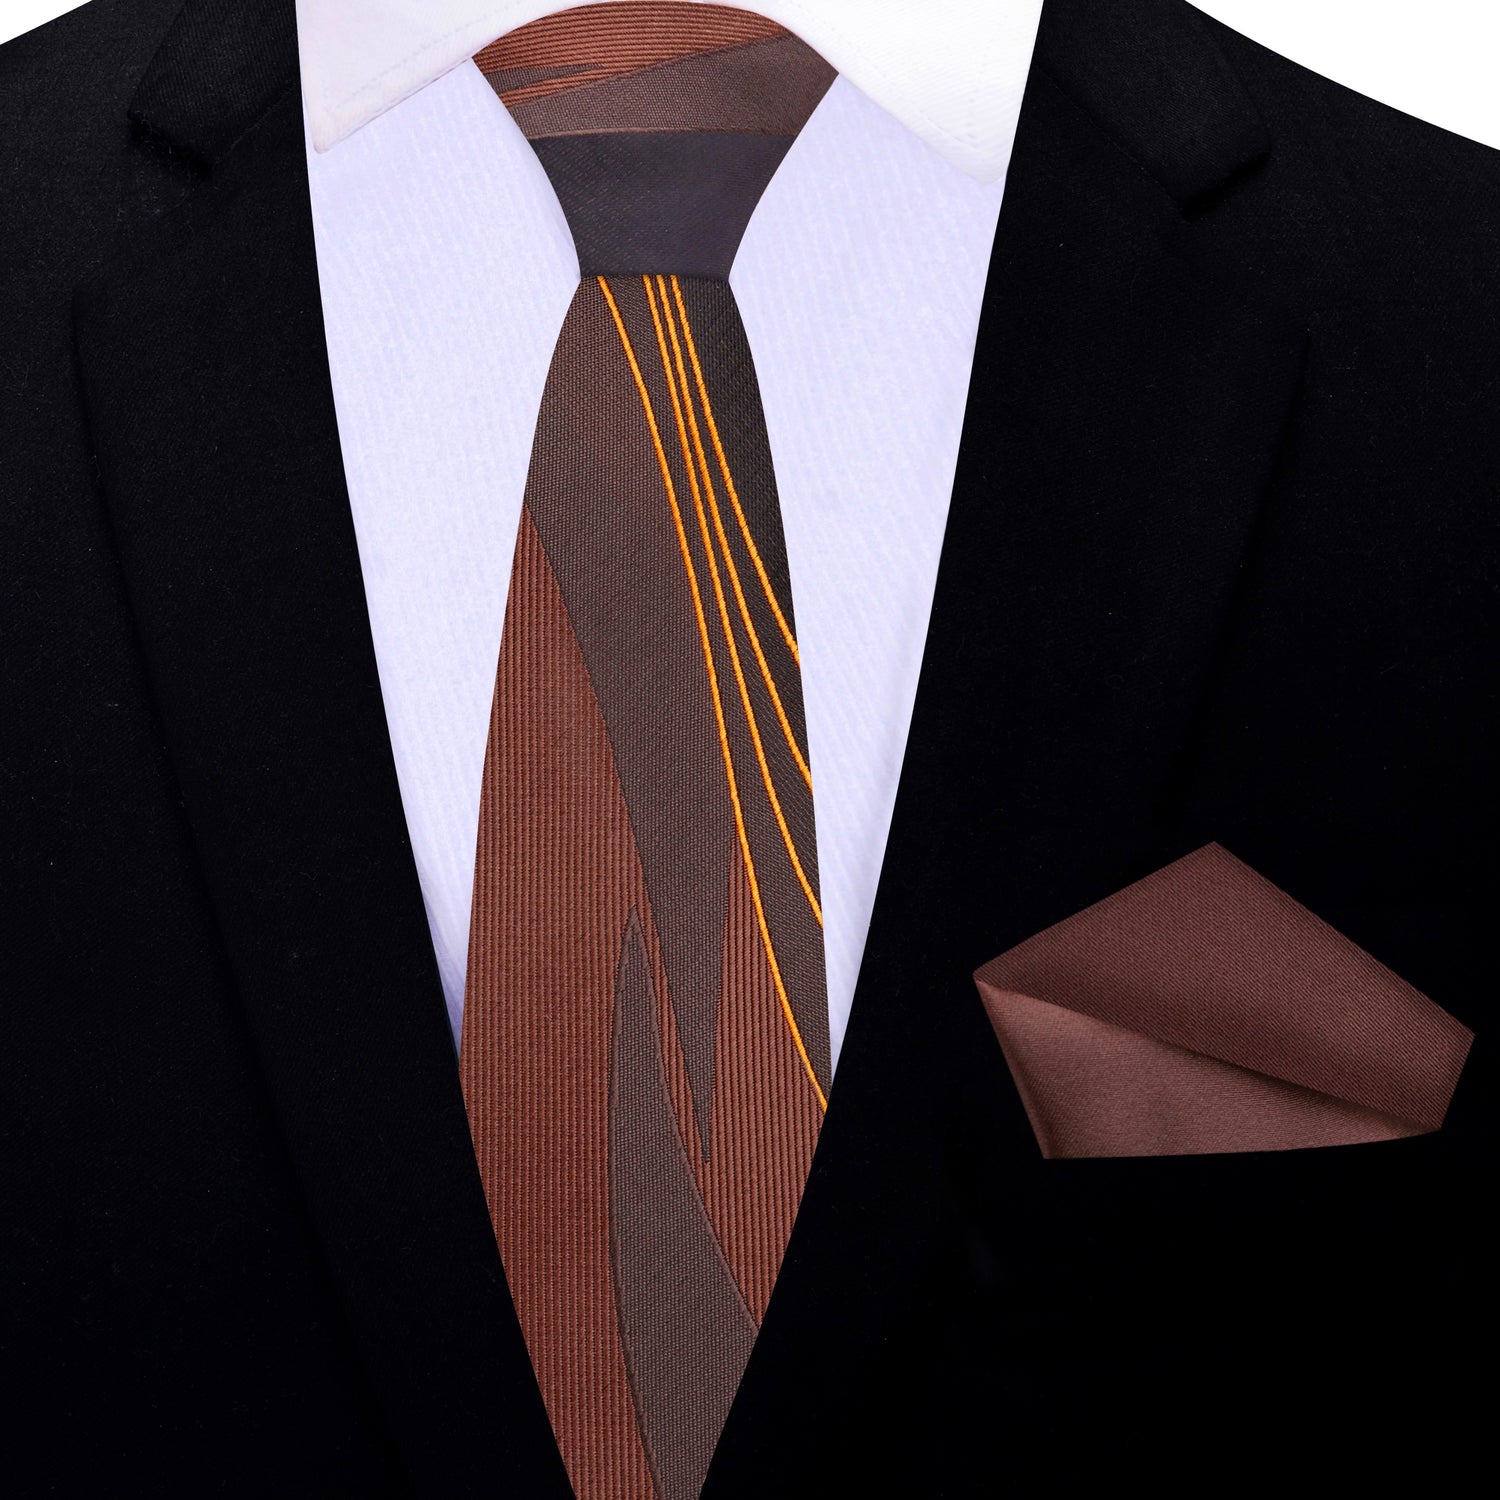 Thin Tie: Shades of Brown Abstract Lines Tie and Brown Square